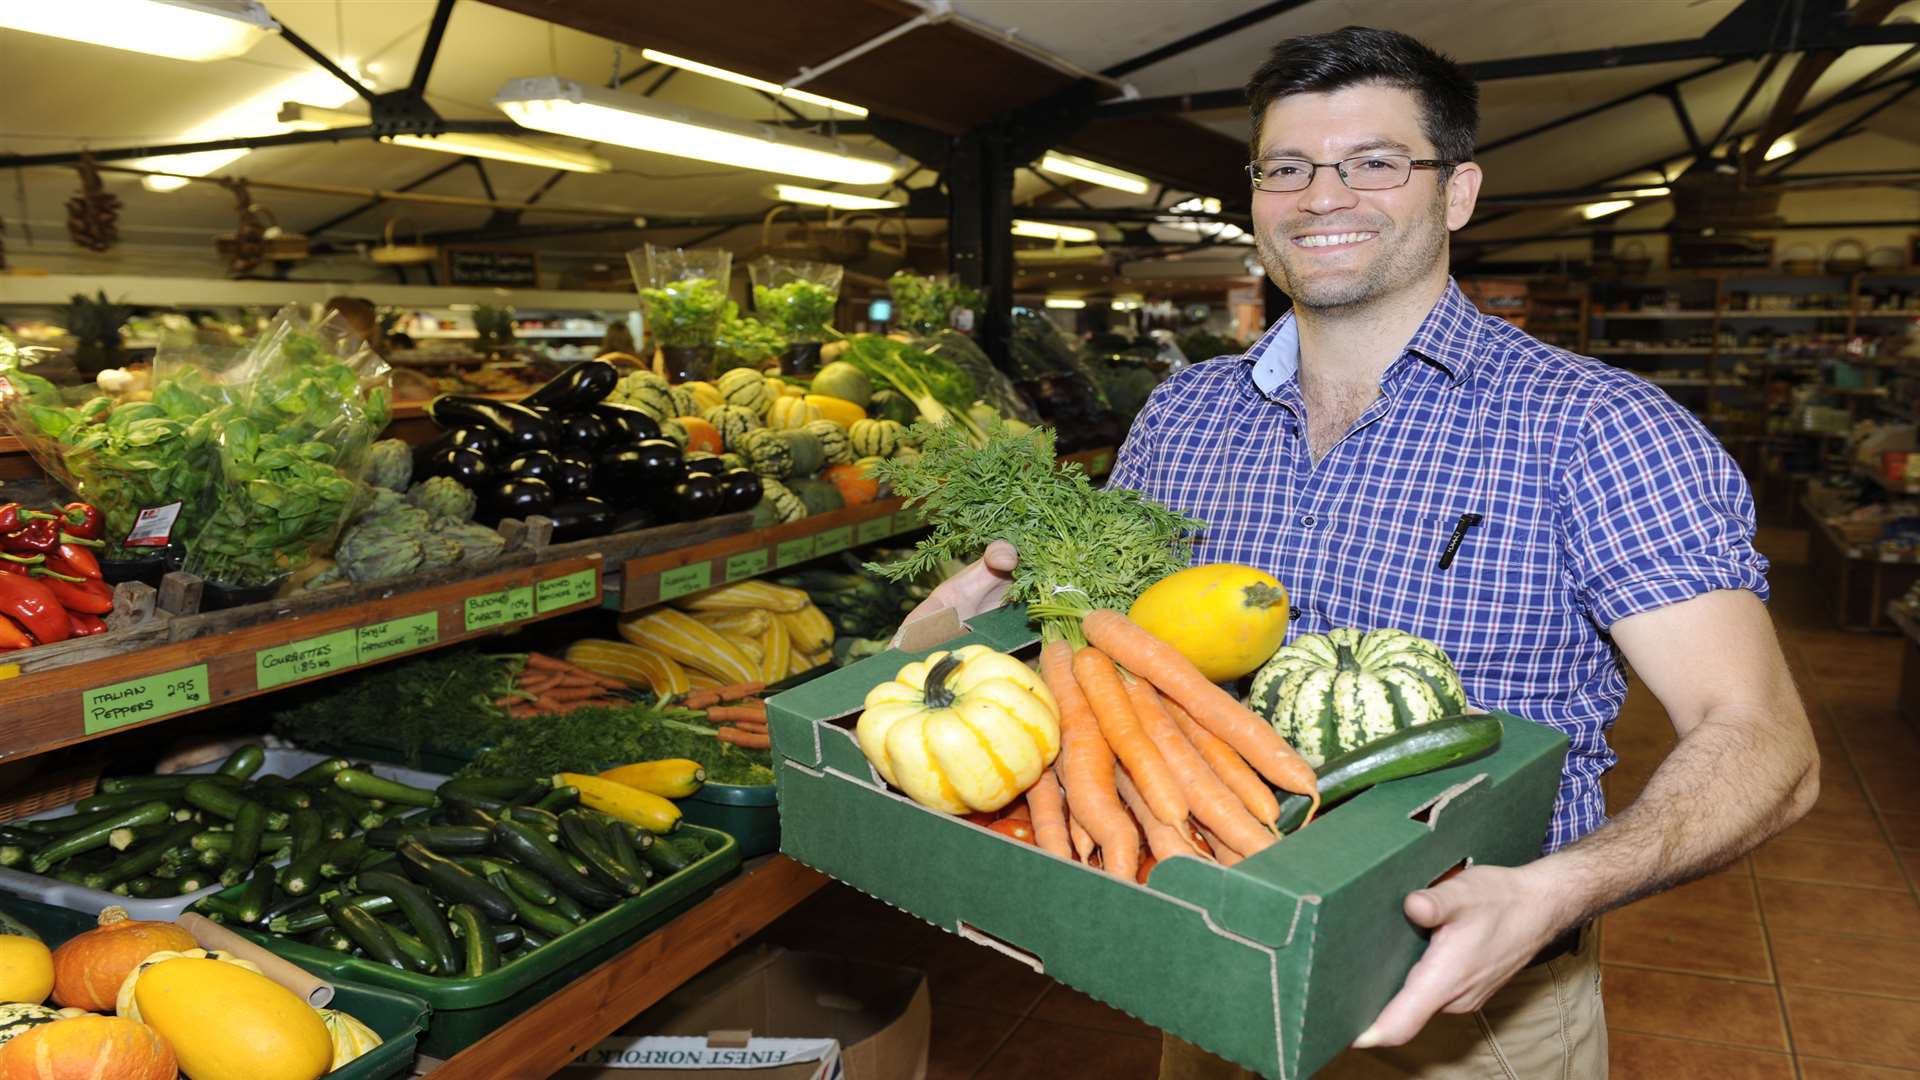 Stefano Cuomo, co-owner of Macknade Fine Foods, which has set up one of the pop up stalls